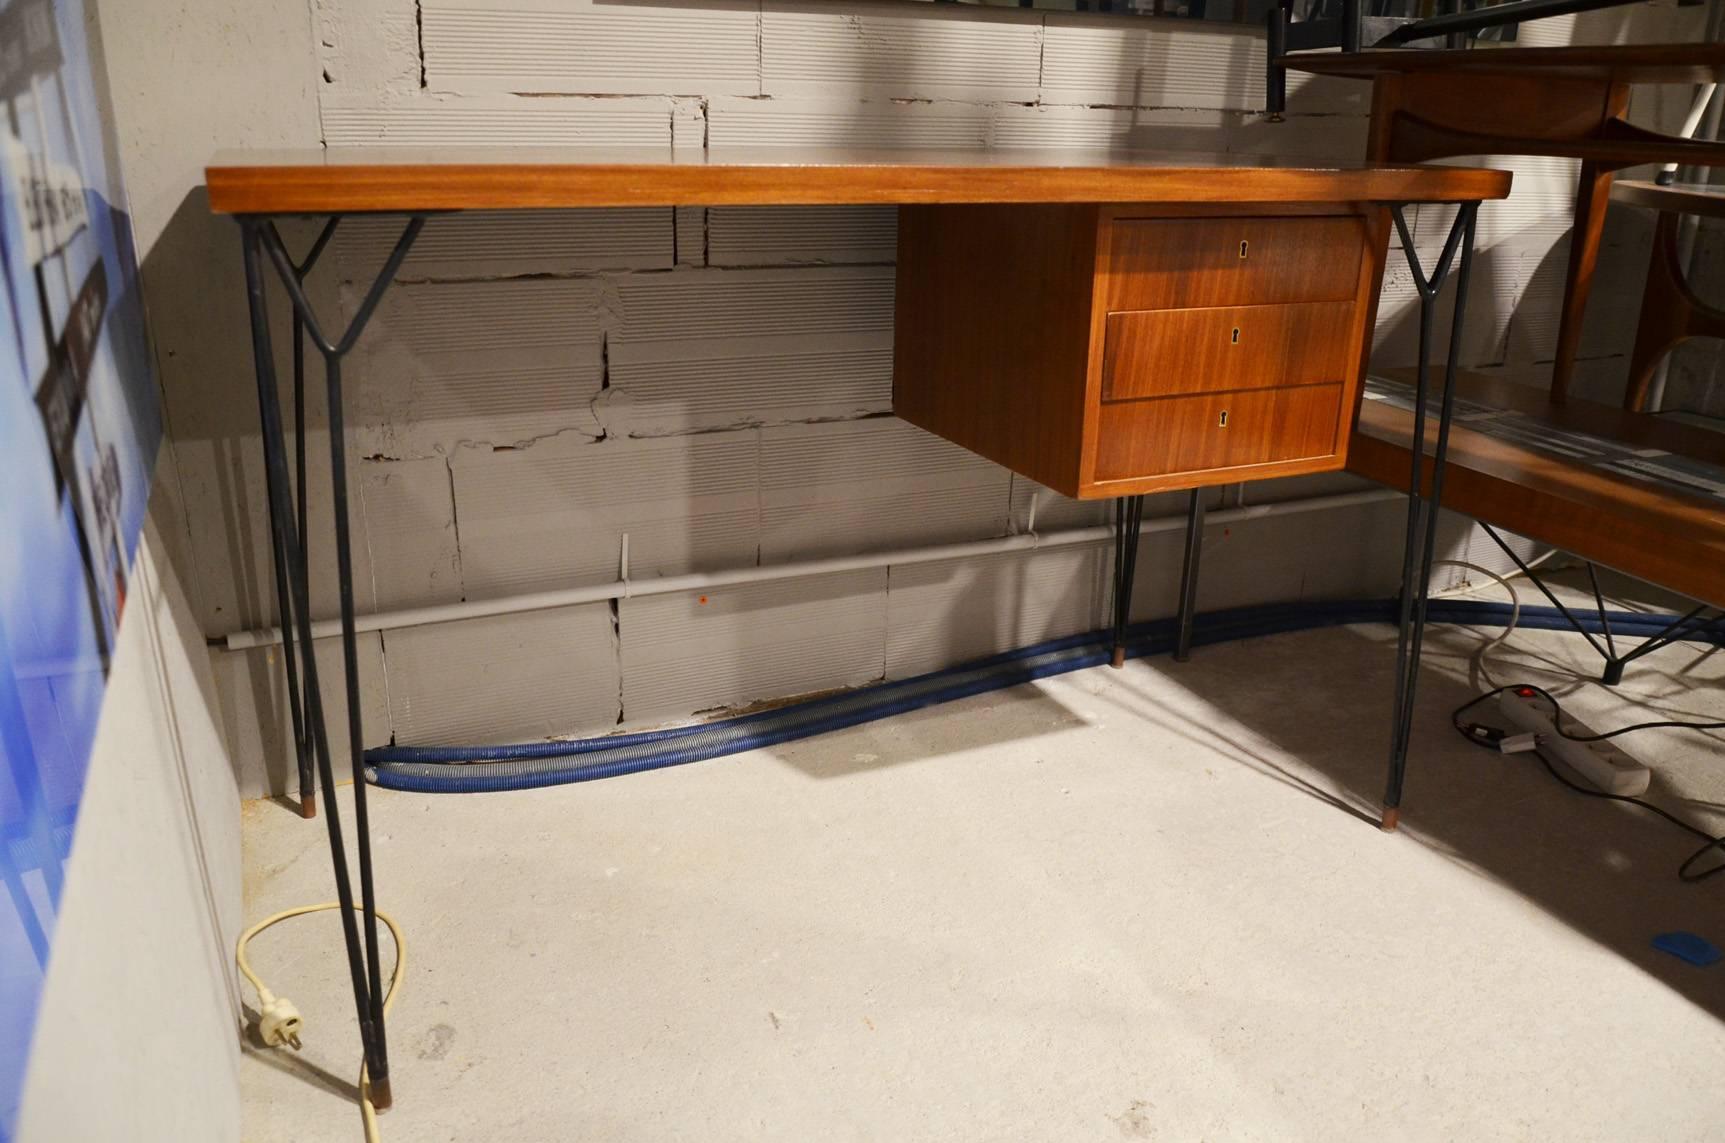 Italian wood and steel desk, circa 1960. In excellent condition
Beautiful feet details.